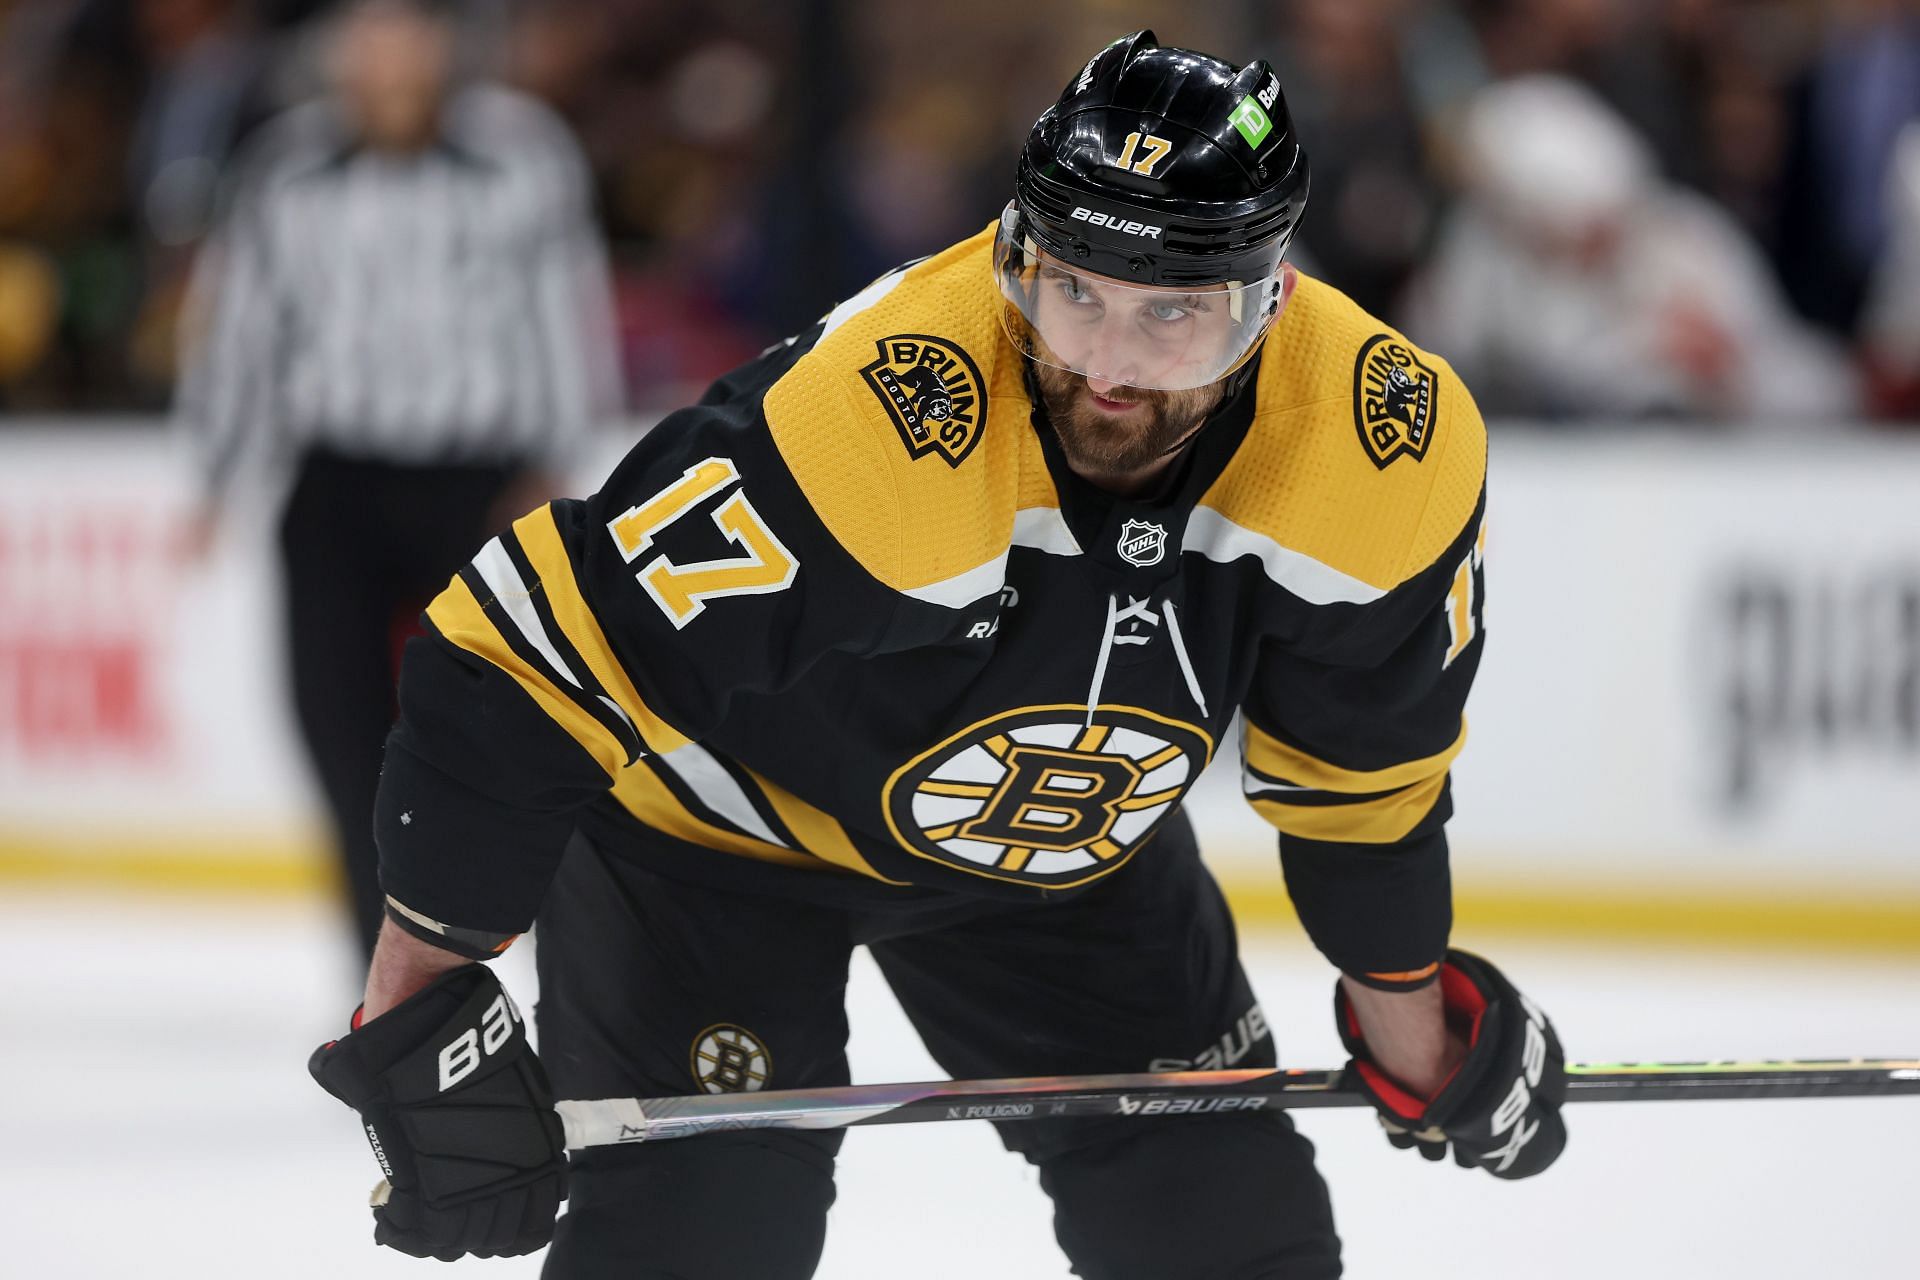 Let's get to Bruins hockey' — Nick Foligno had the right words for a  special moment - The Boston Globe